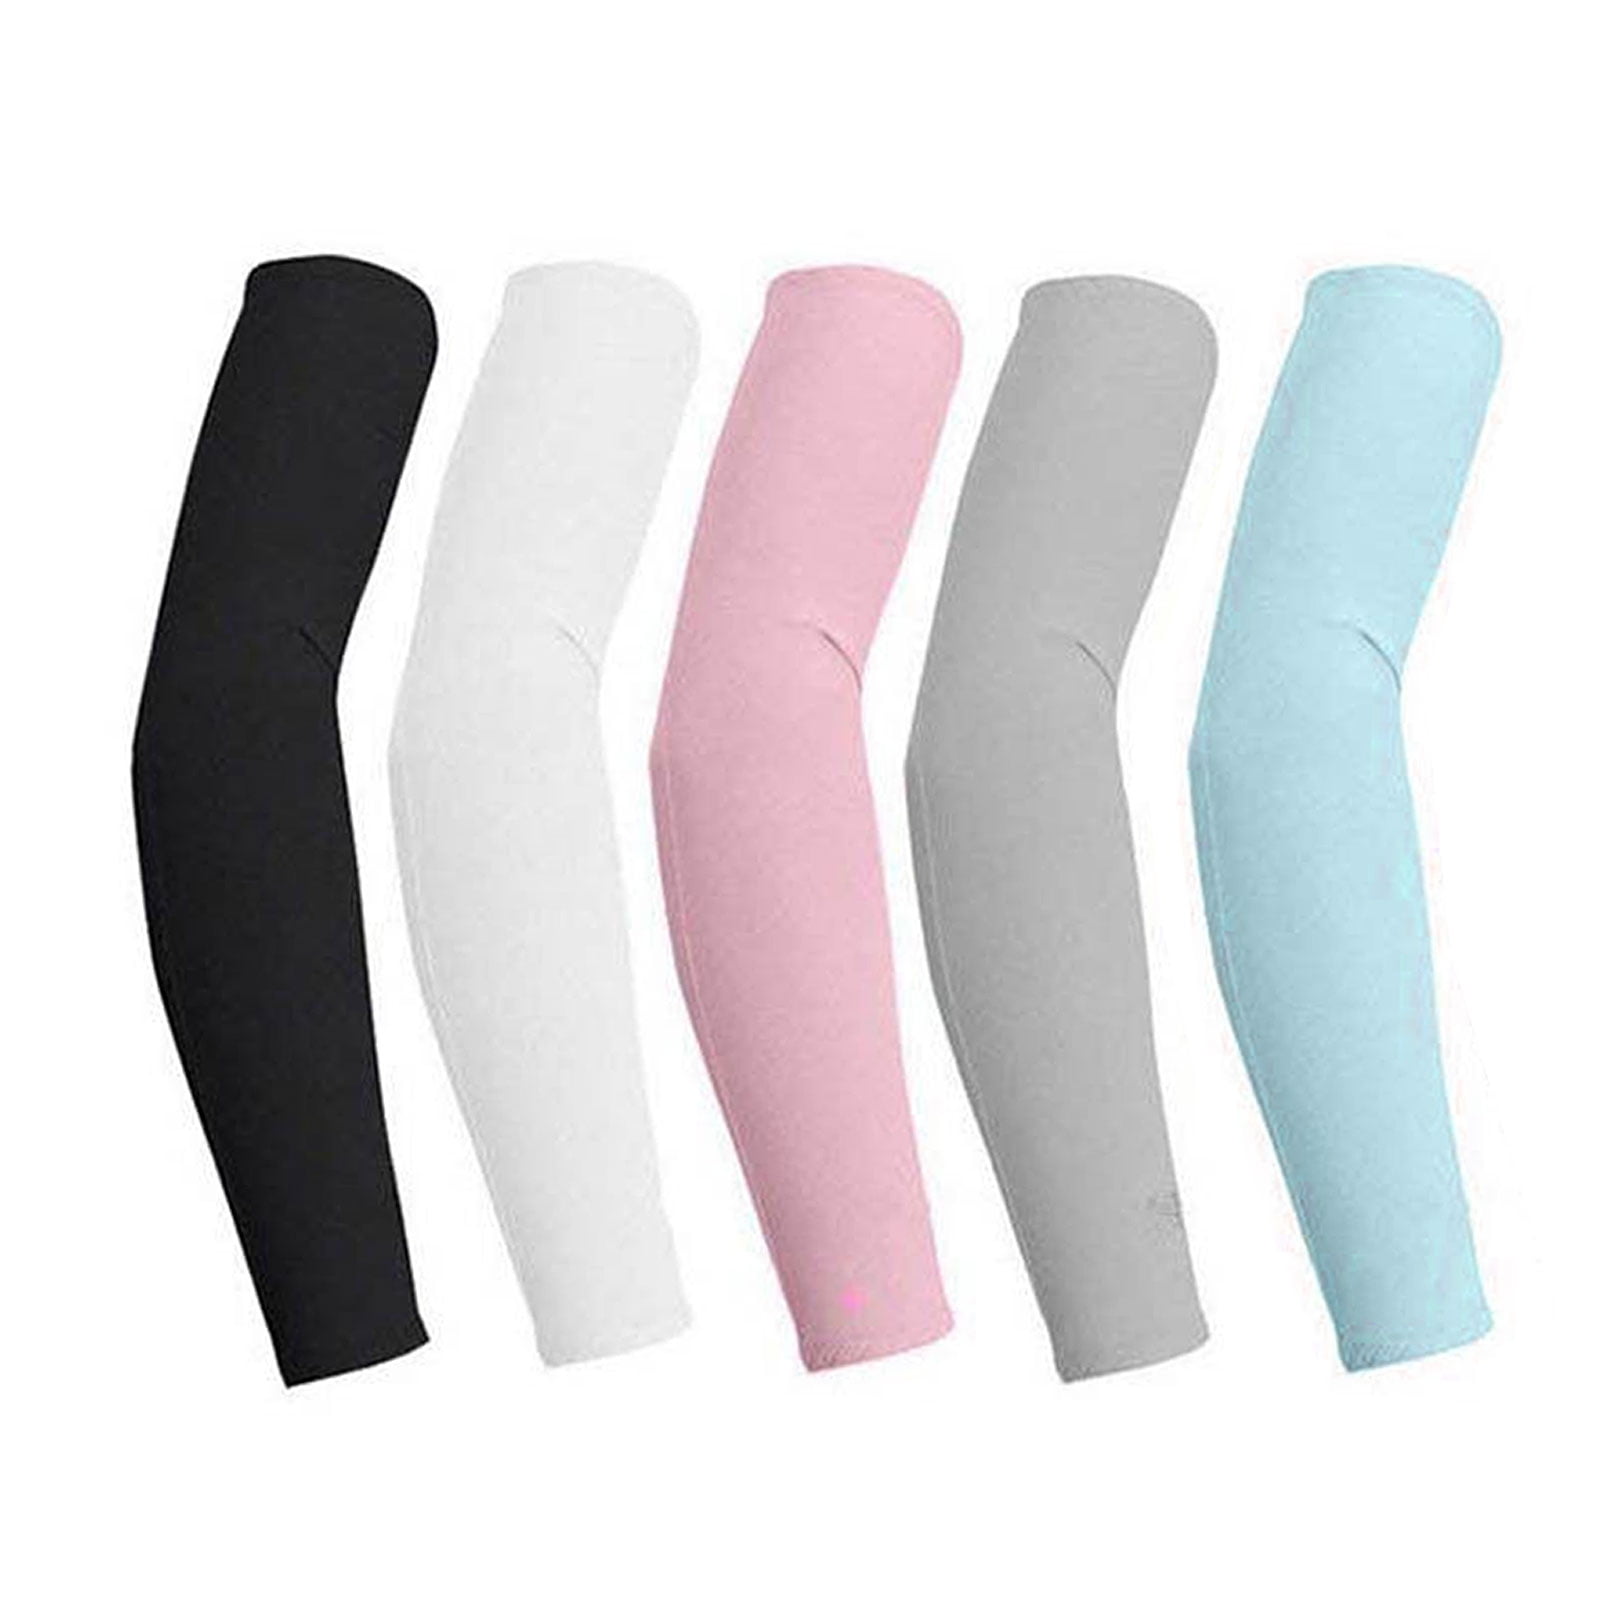 5 Pair Cooling Arm Sleeves Cover UV Sun Protection Outdoor Sports For Men Women 